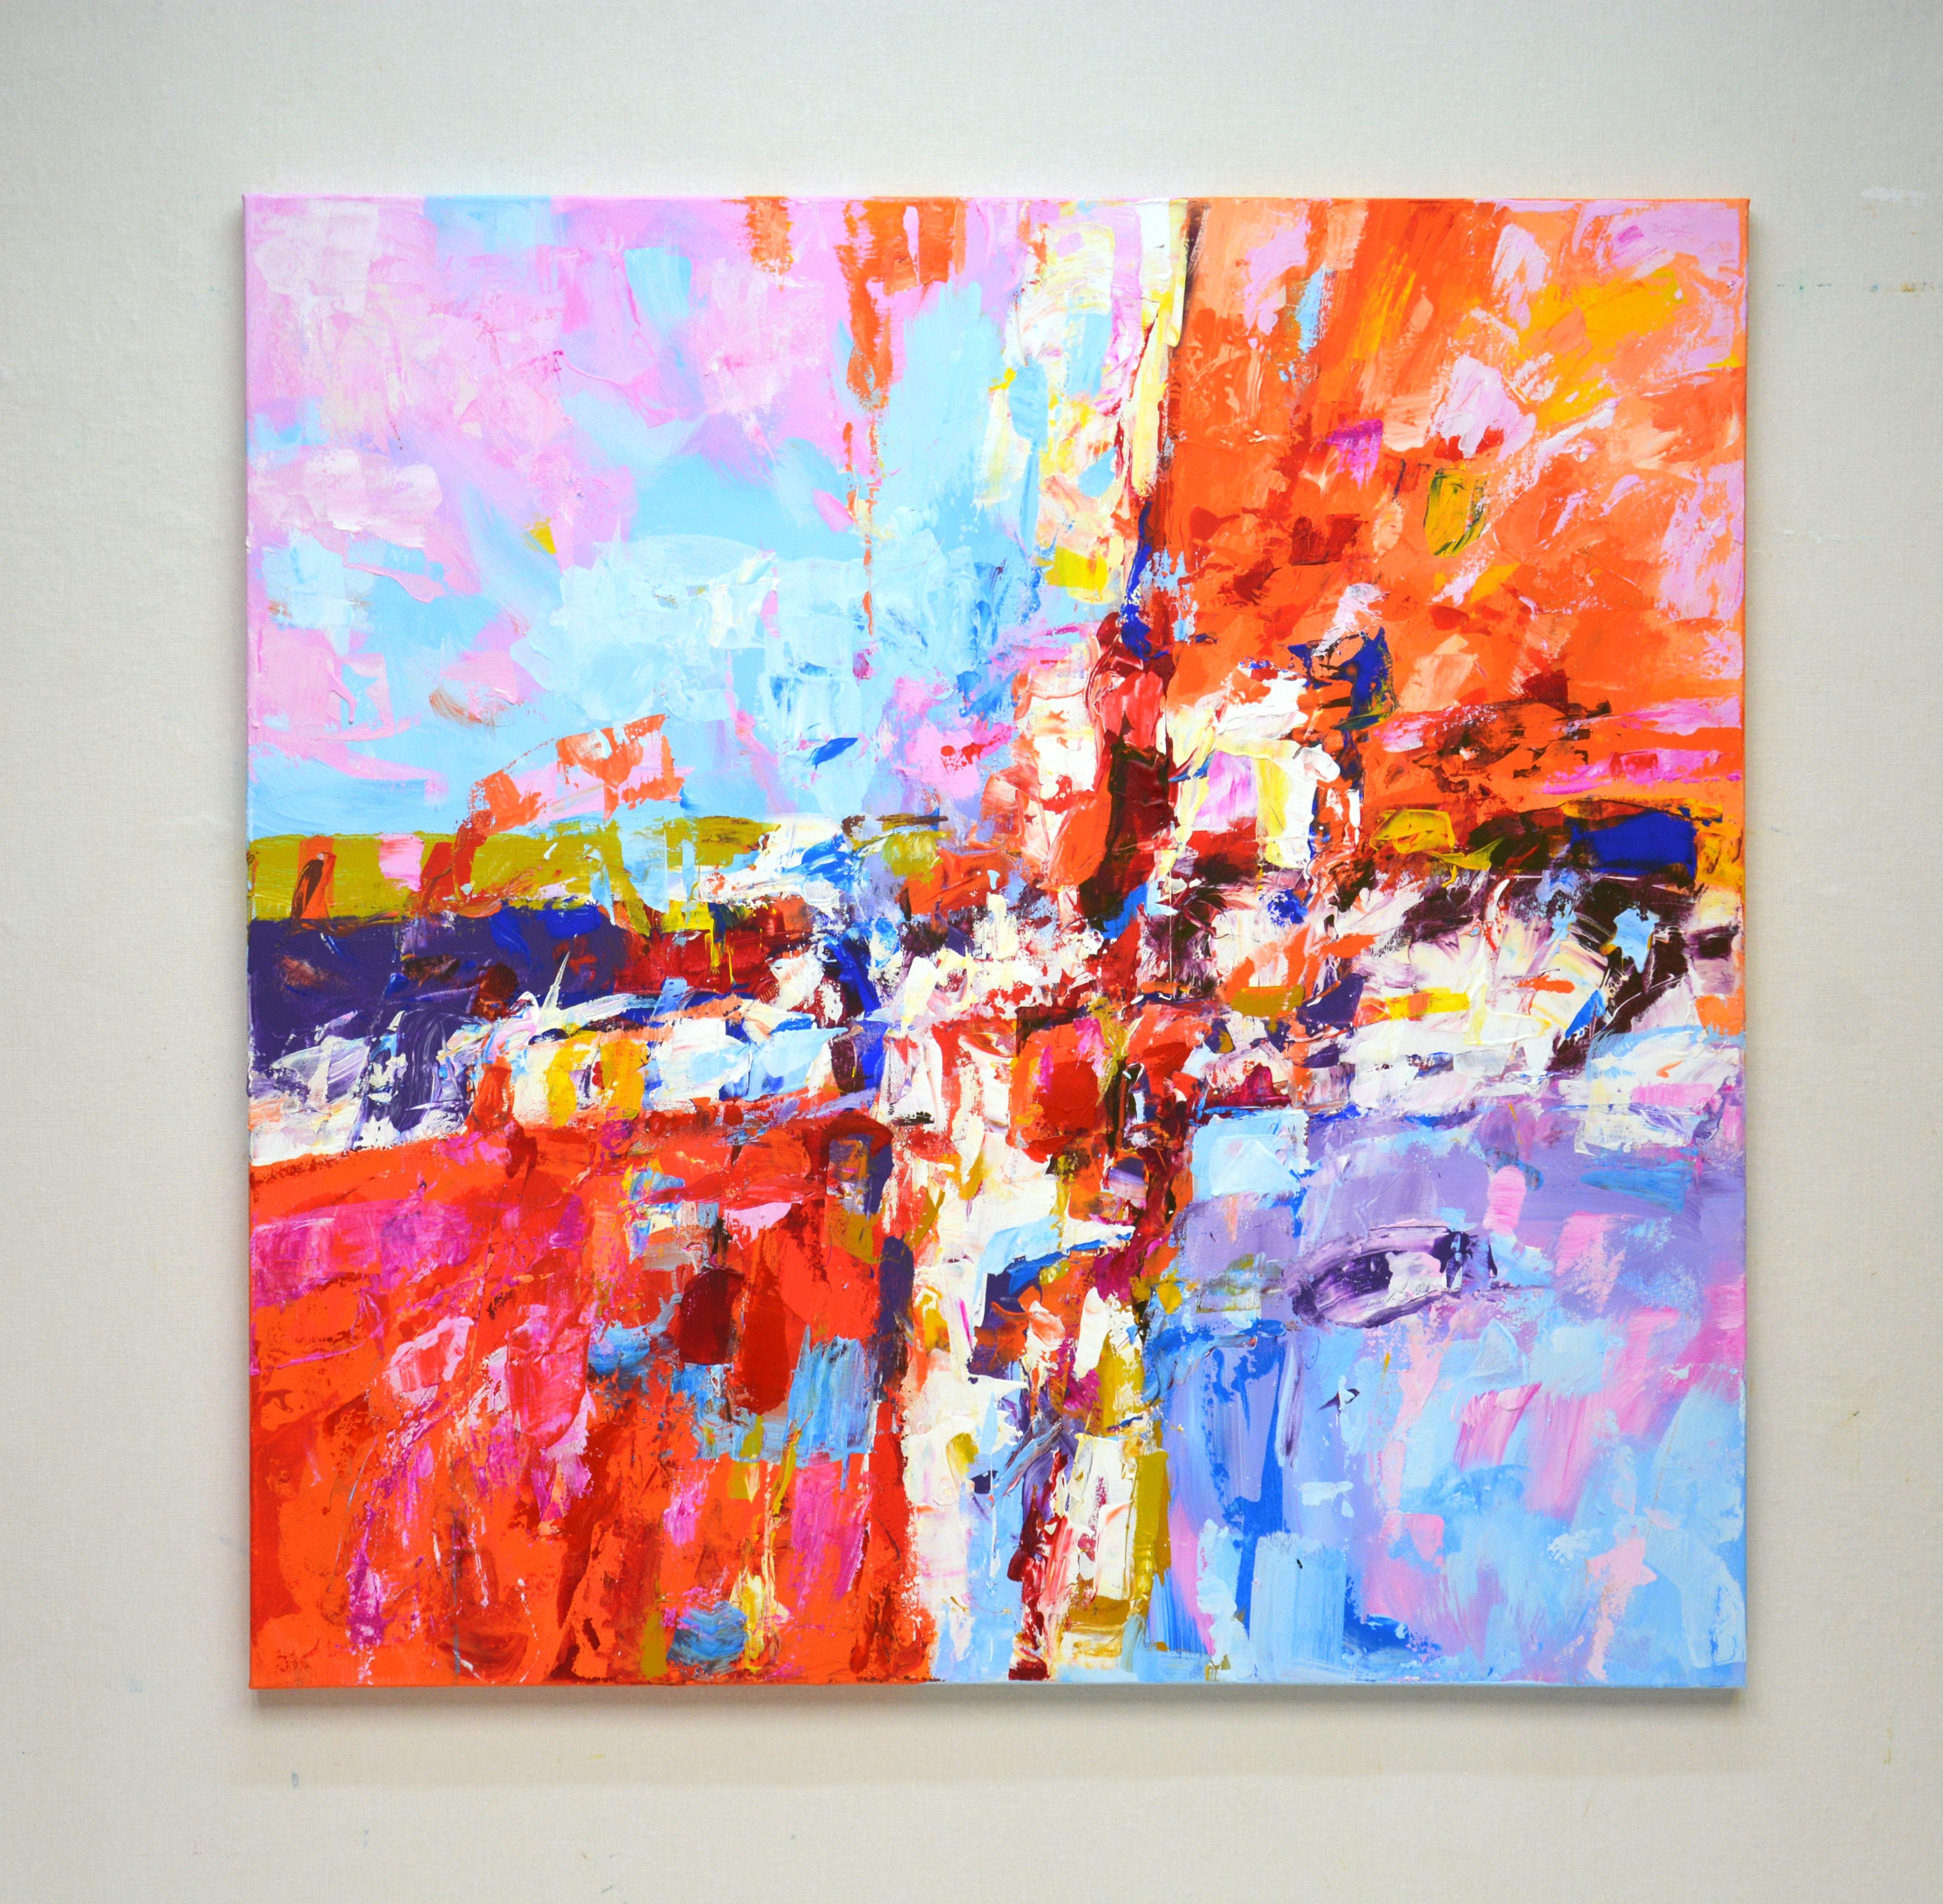 Seize the moment. This unique abstract acrylic painting will accentuate your interior. The product has a consistent modern aesthetic design and is filled with positive energy. Vivid colors overlap and overlap each other, and also stand out with